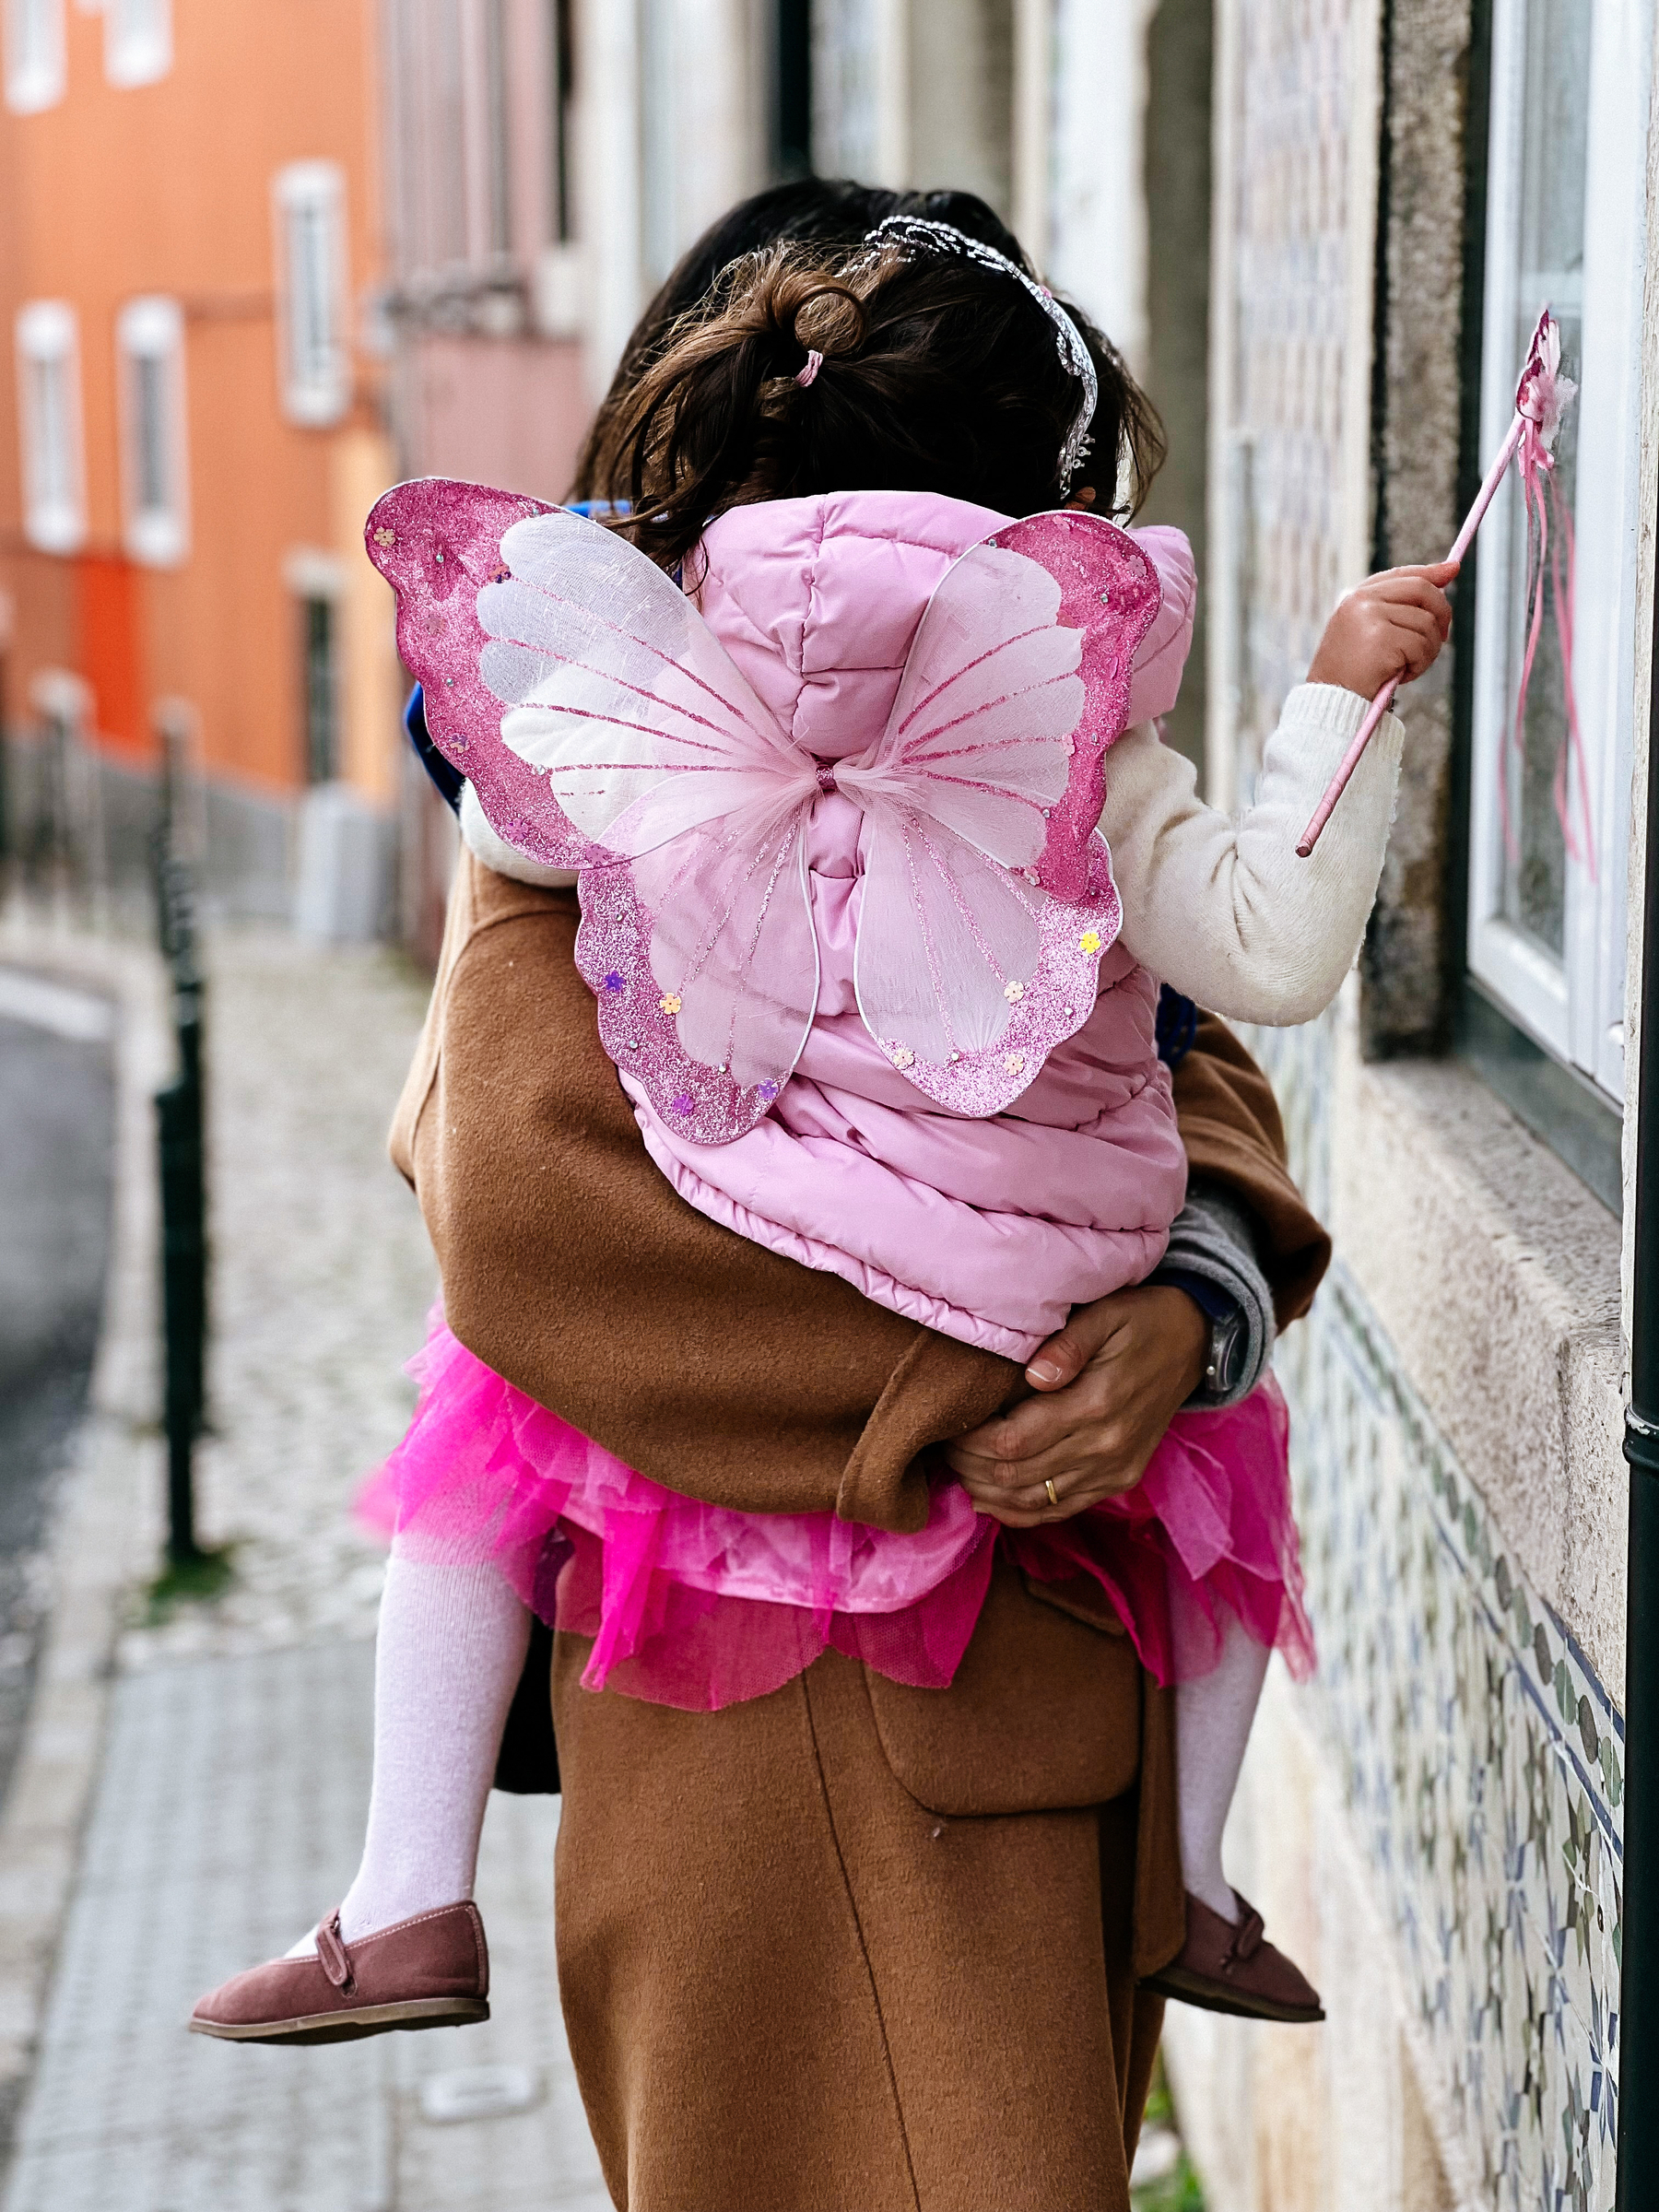 A toddler dressed as a pink fairy taps a window with her magic wand, while her mother holds her. 